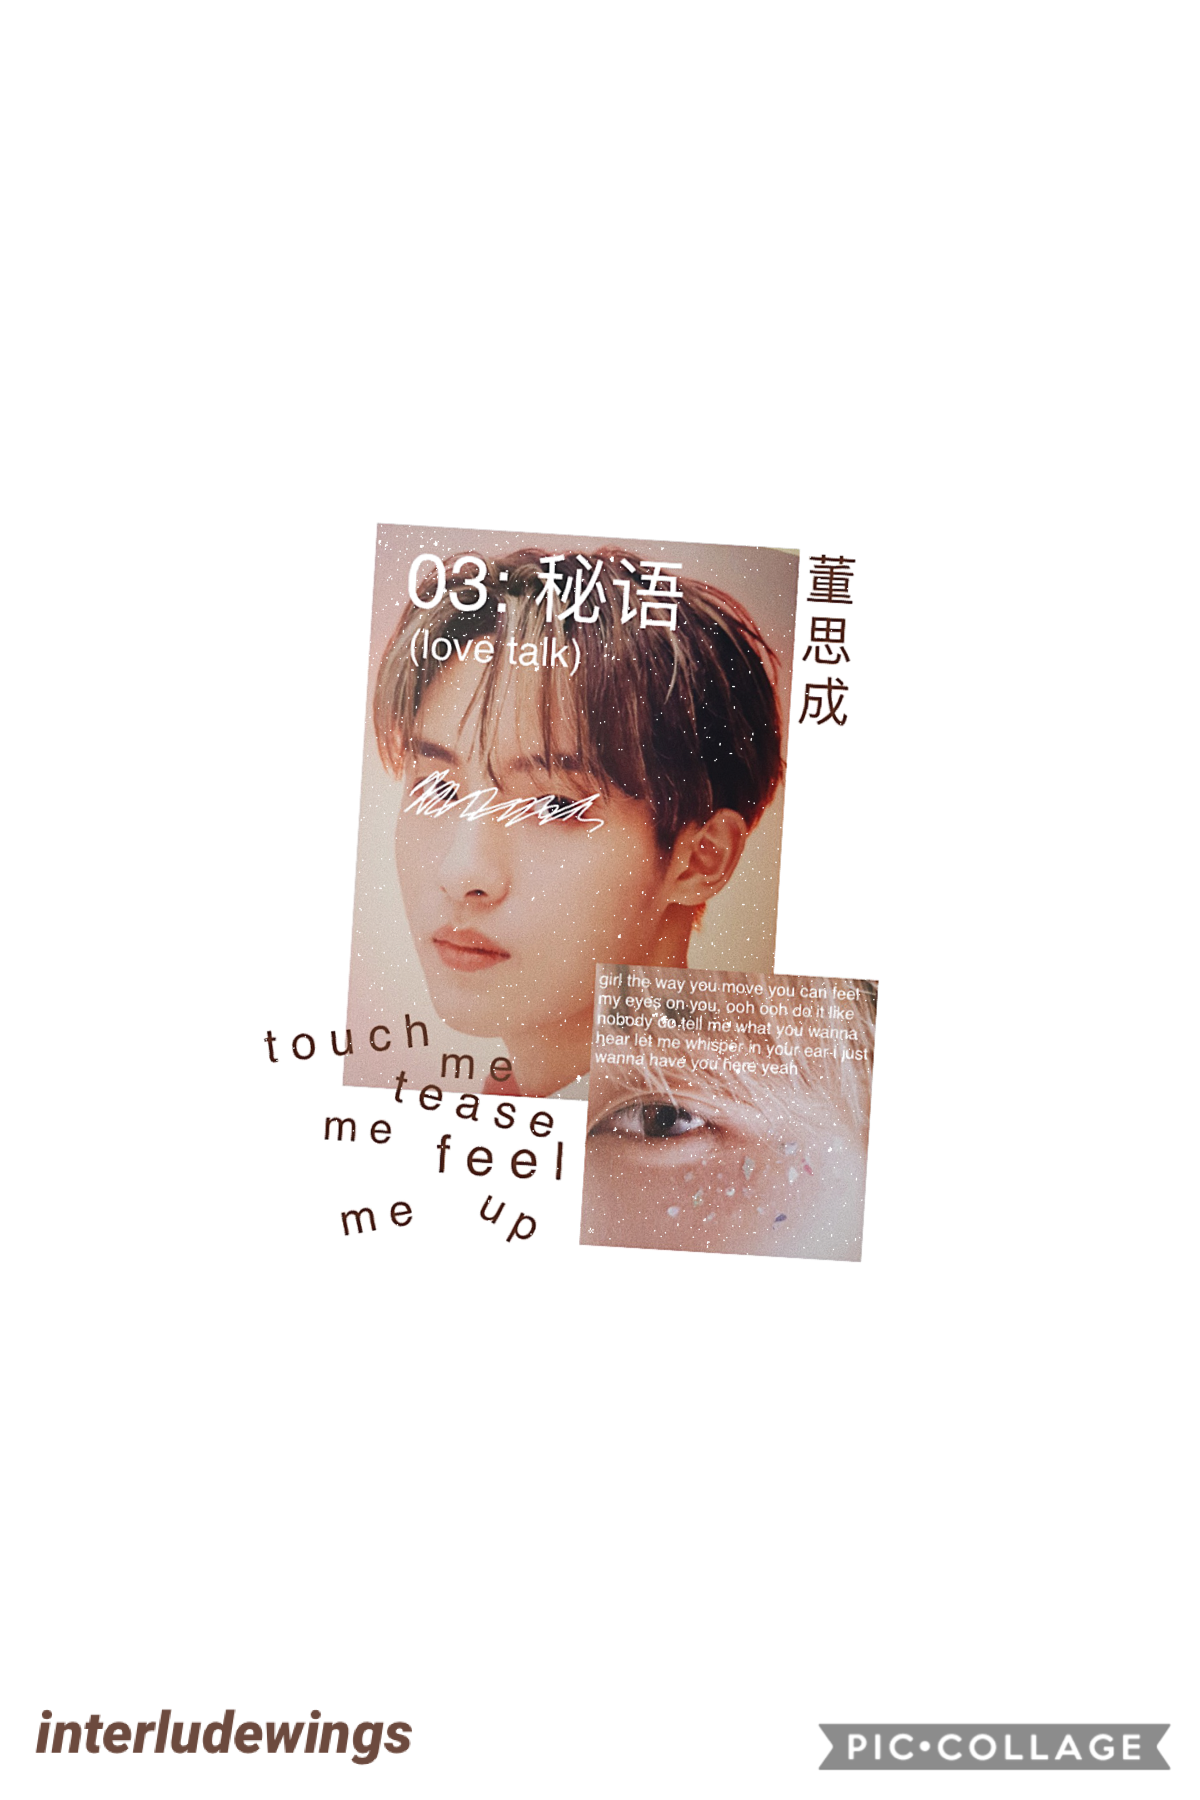 🍂 open 🍂
winwin~wayv 
i’m still on hiatus but i got some inspiration for this edit! i’ve been obsessed w love talk ever since it came out! 